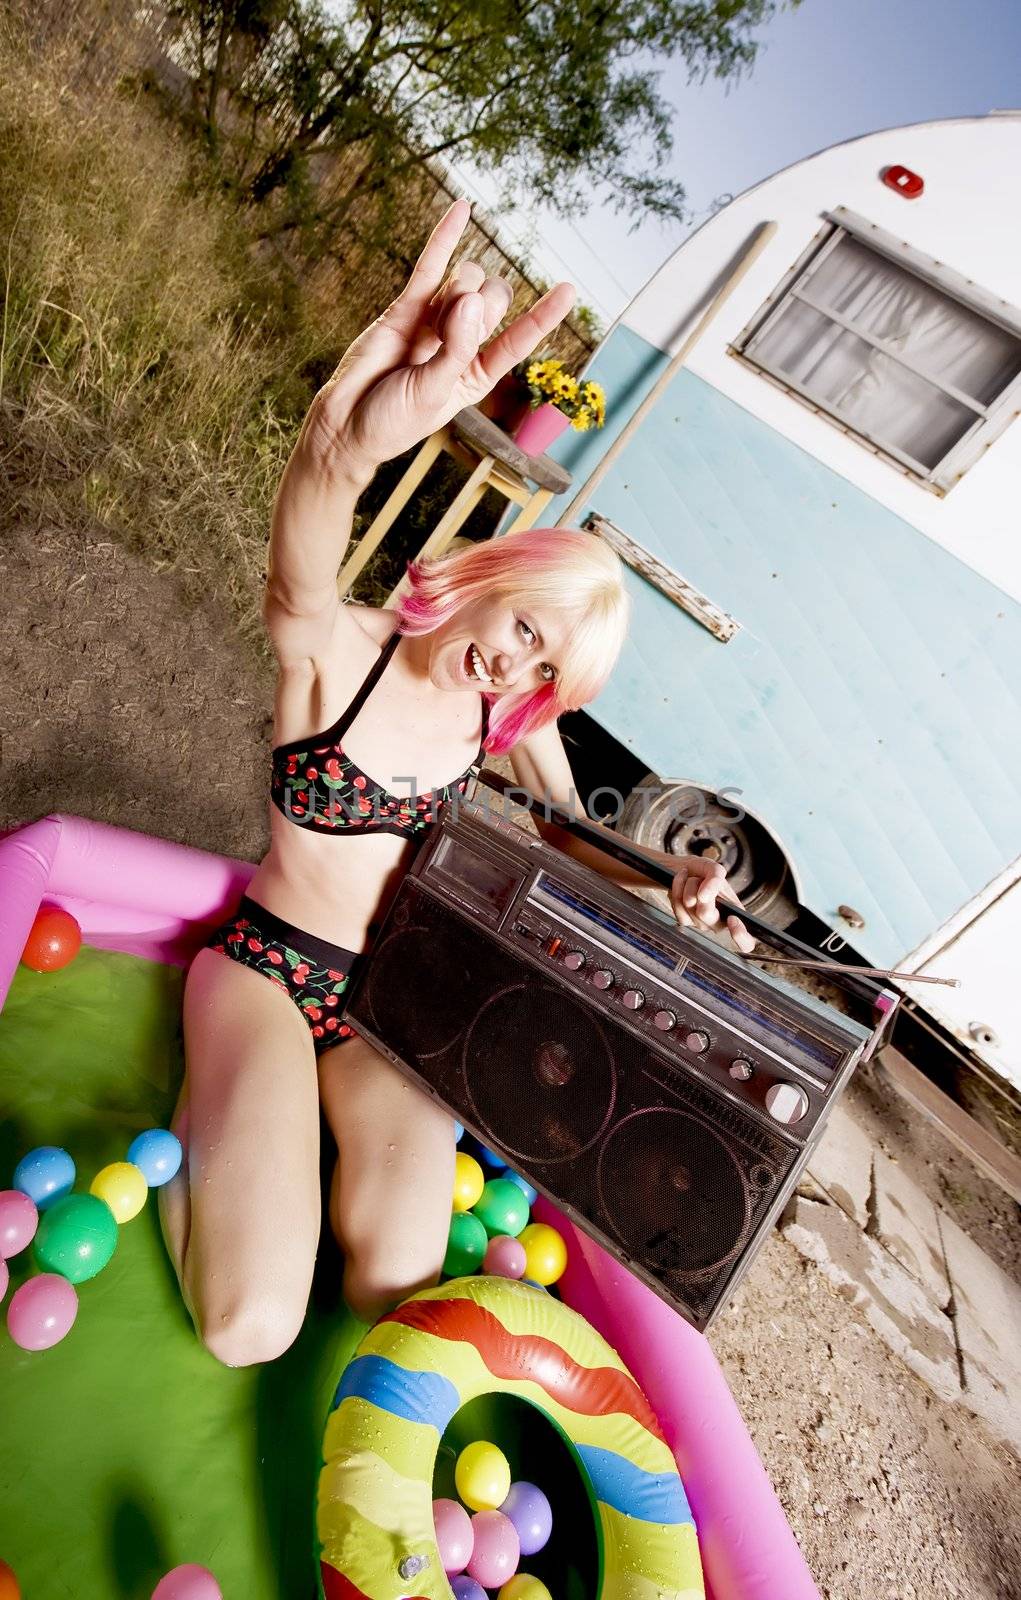 Rock and Roll Woman in a Play Pool by Creatista